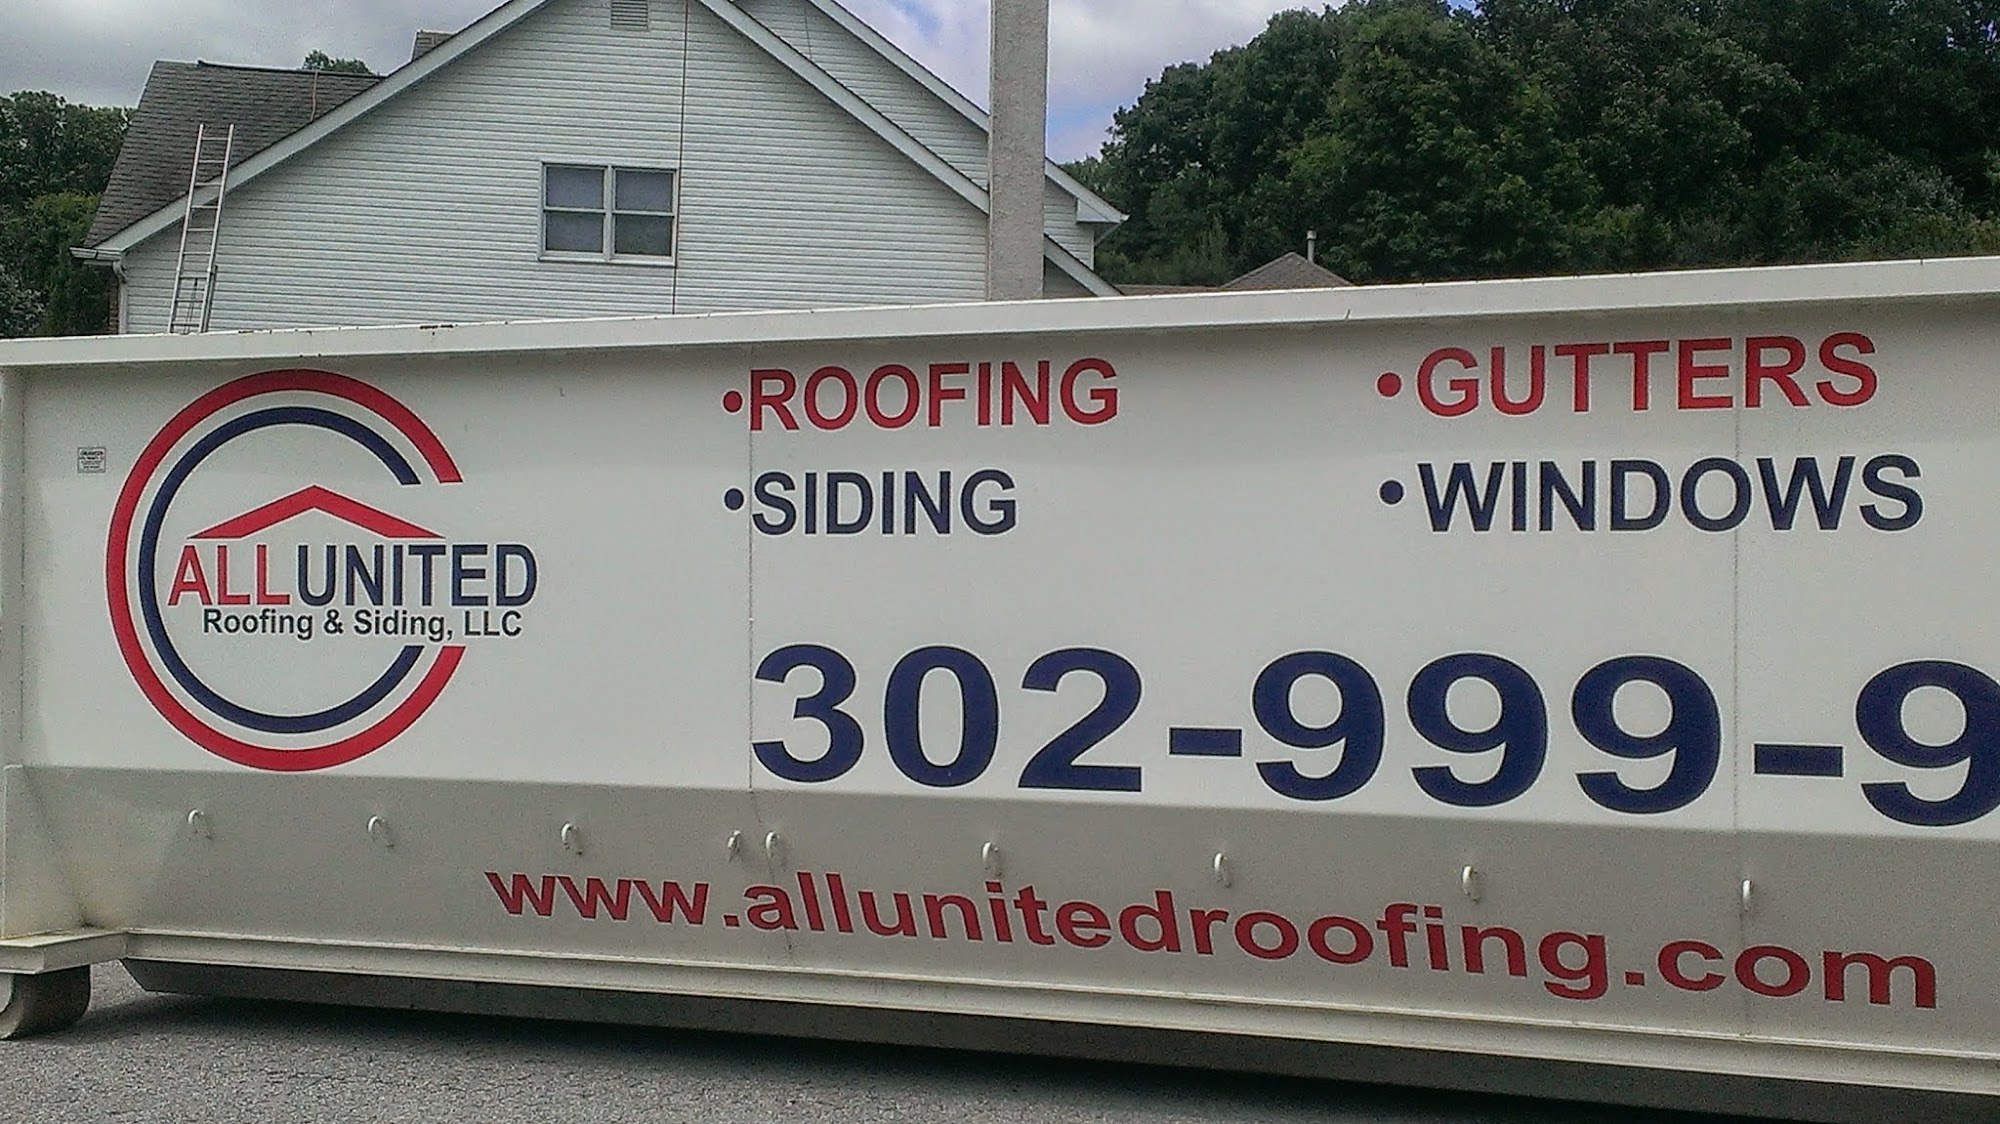 ALL UNITED Roofing and Siding, LLC